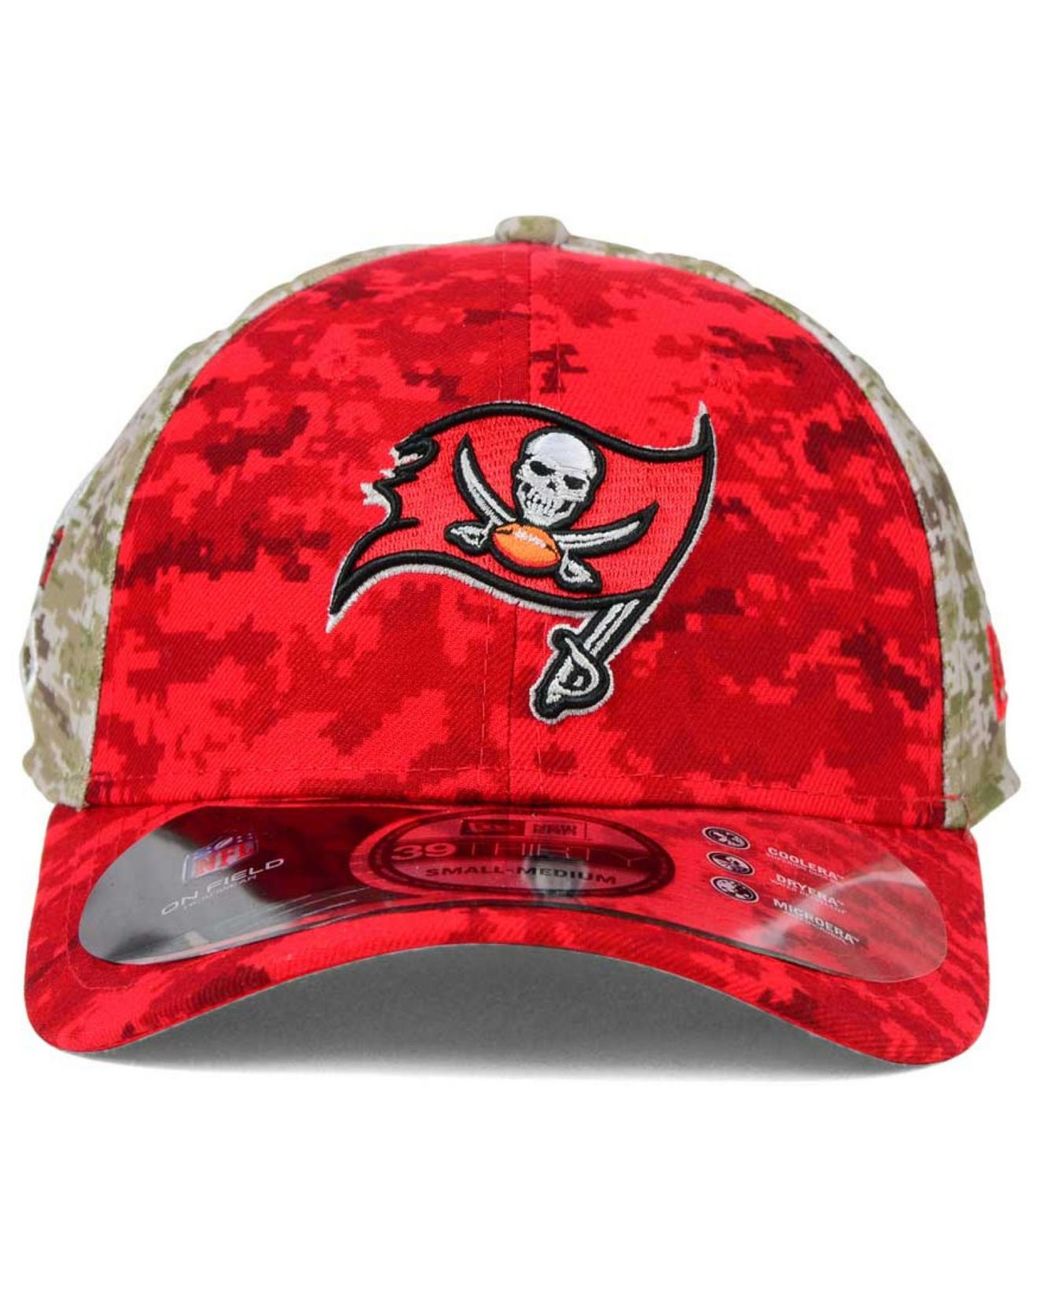 New Era 39Thirty Cap Salute to Service Tampa Bay Buccaneers 